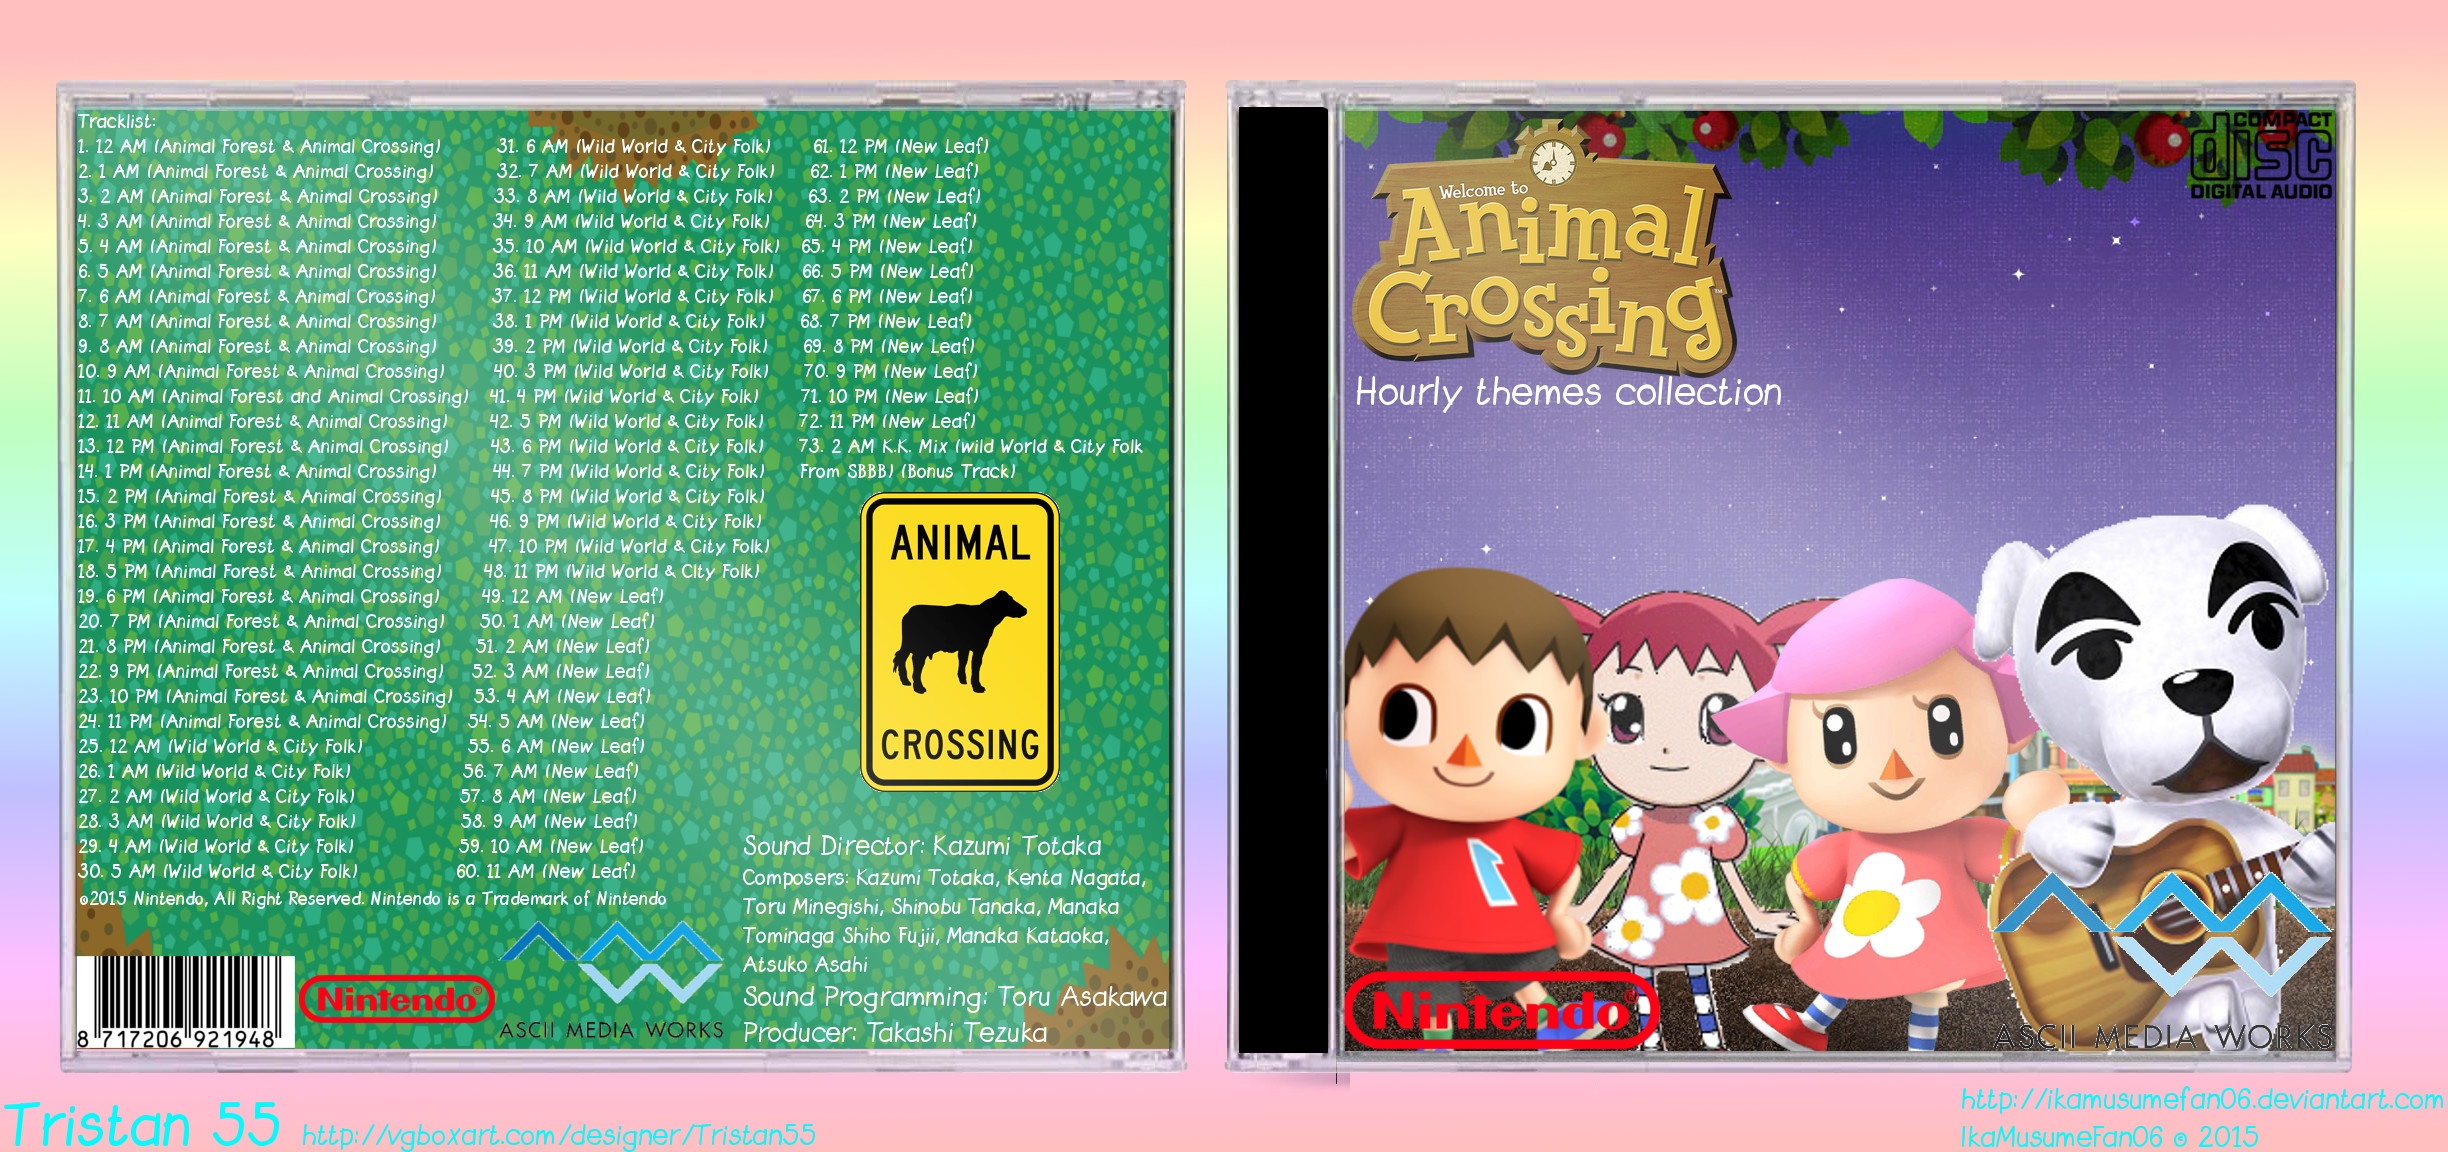 Animal Crossing: Hourly Themes Collection box cover